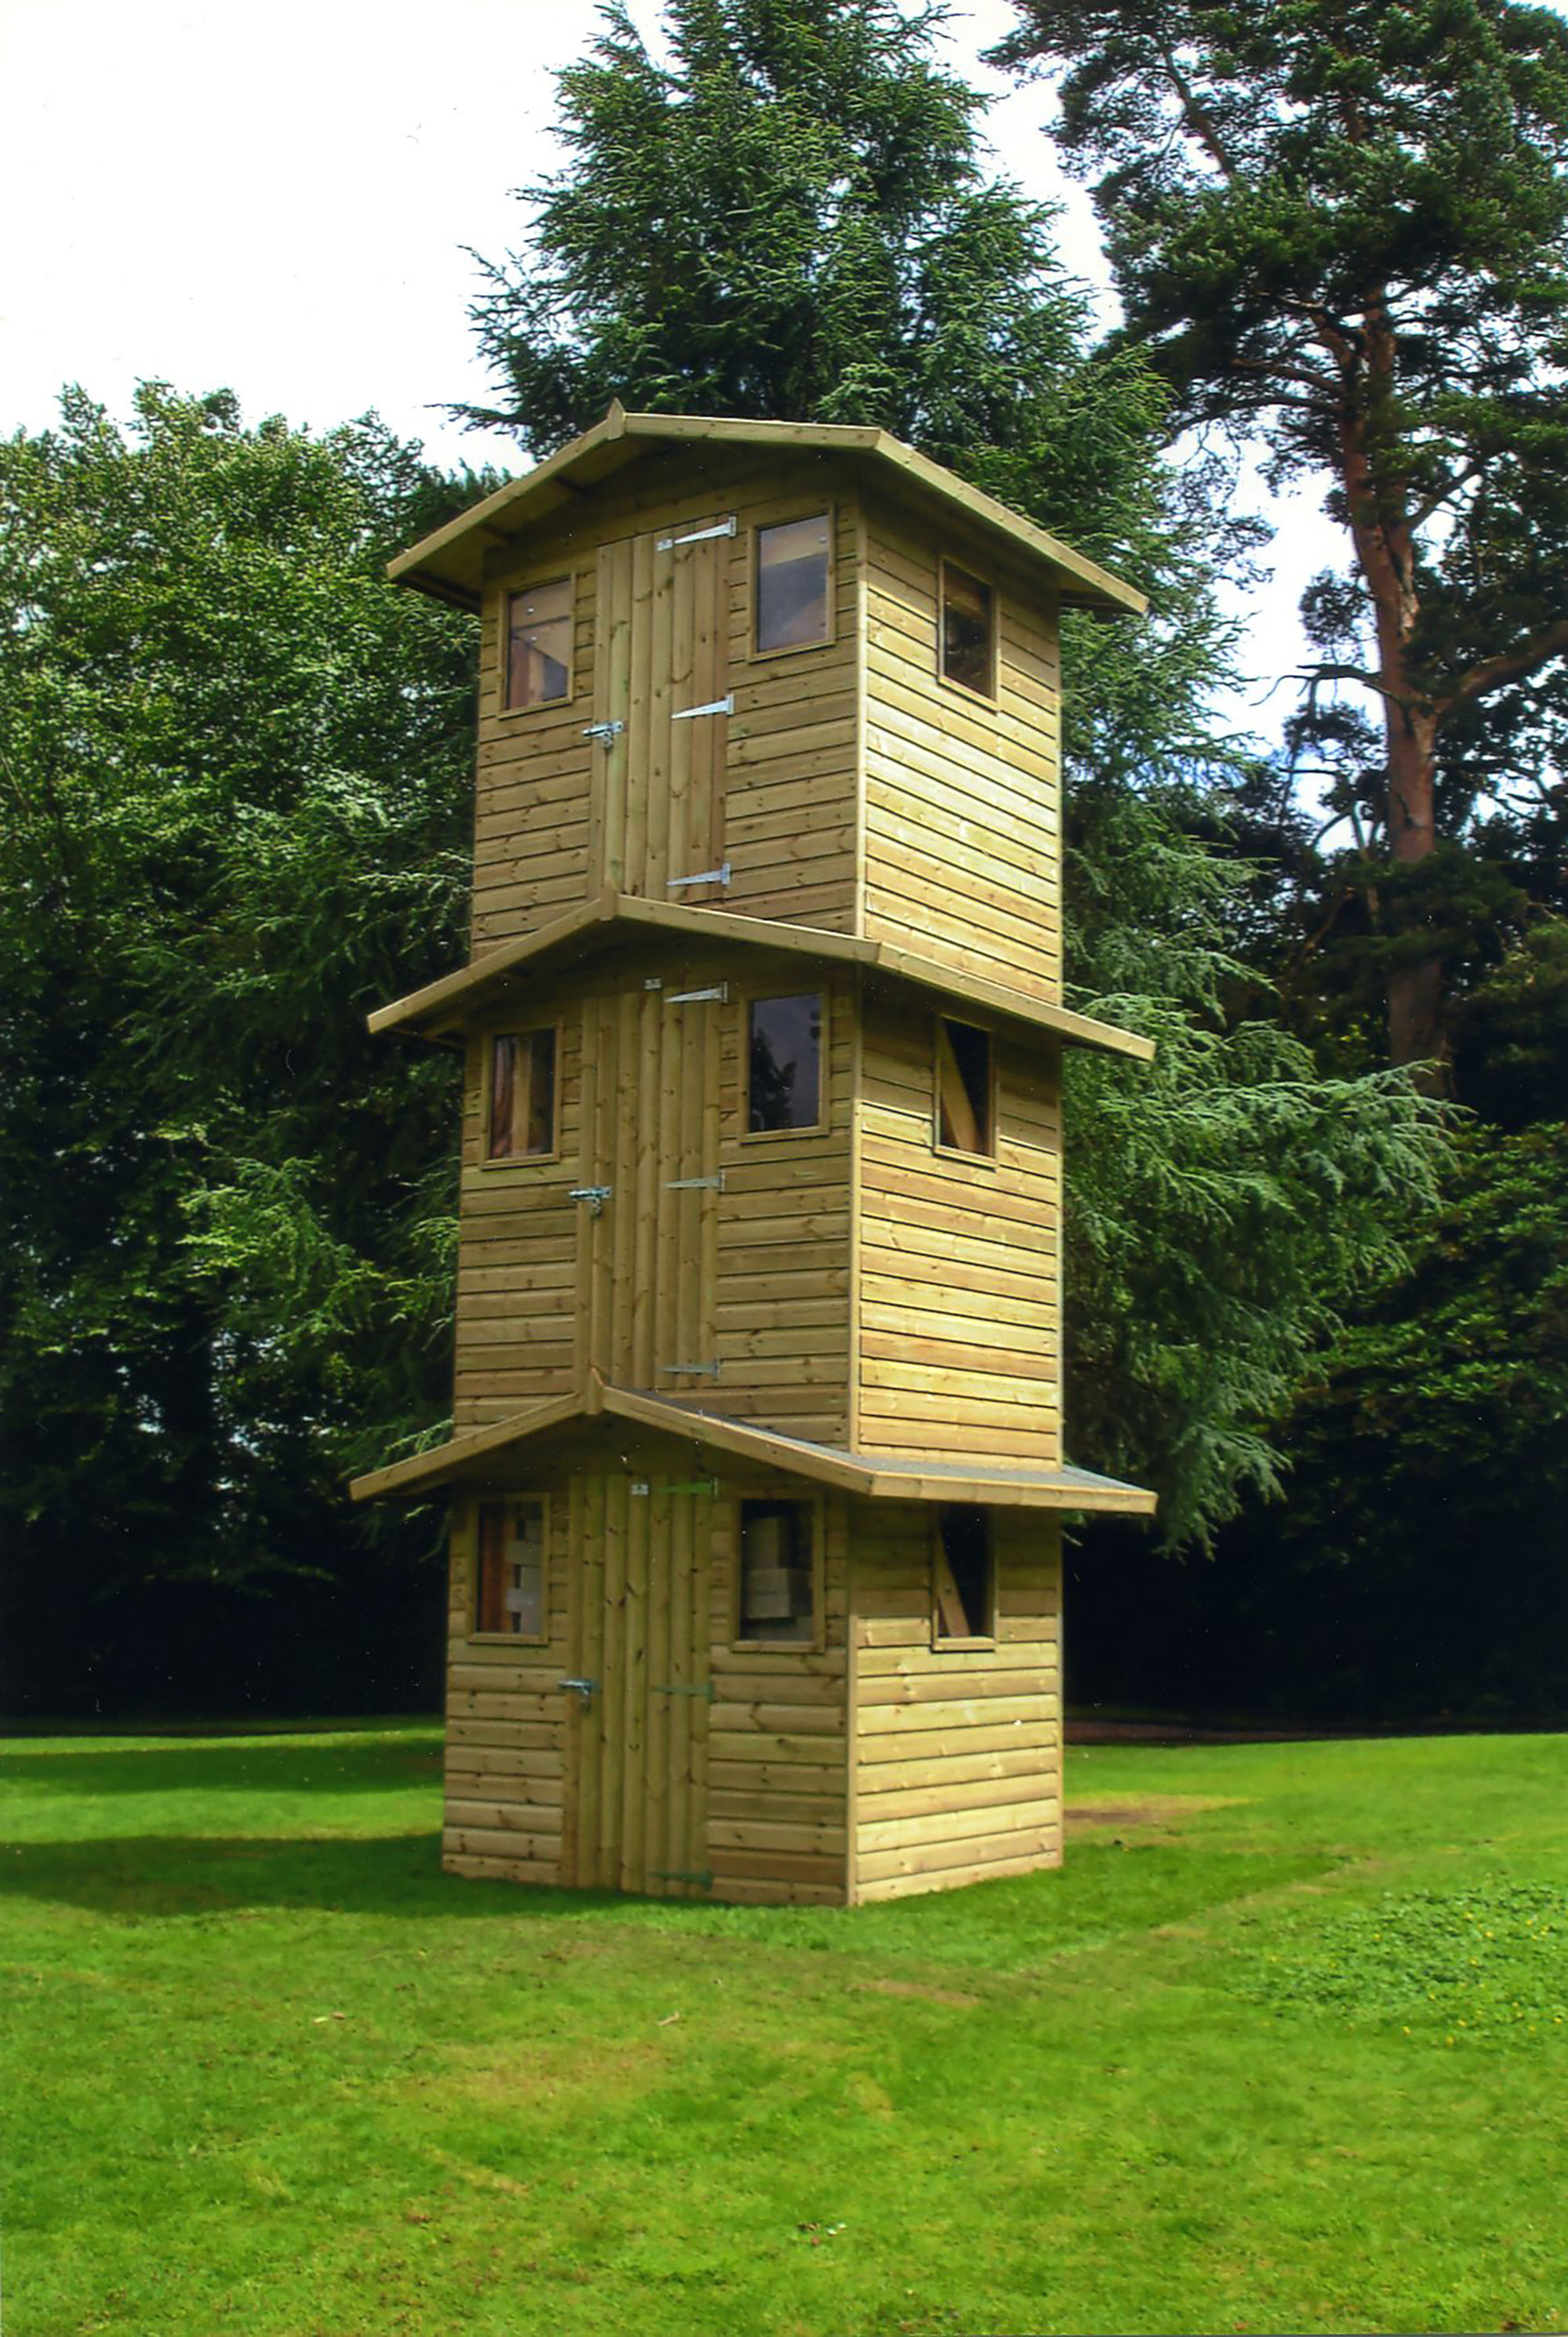 Nicky Coutts, A Tower in the Mind of Others, 2008